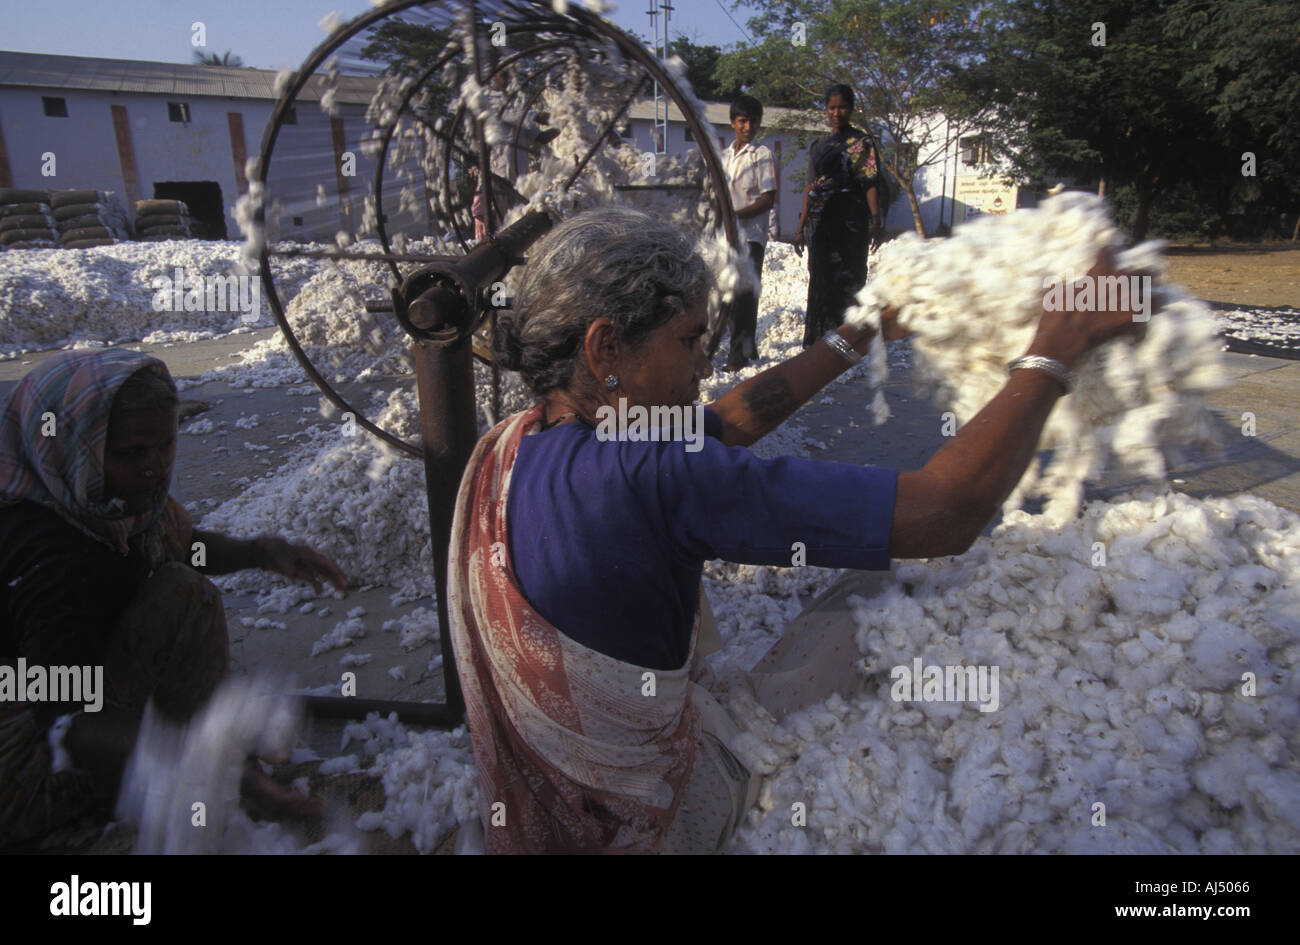 Cotton being milled in Warangal India Stock Photo